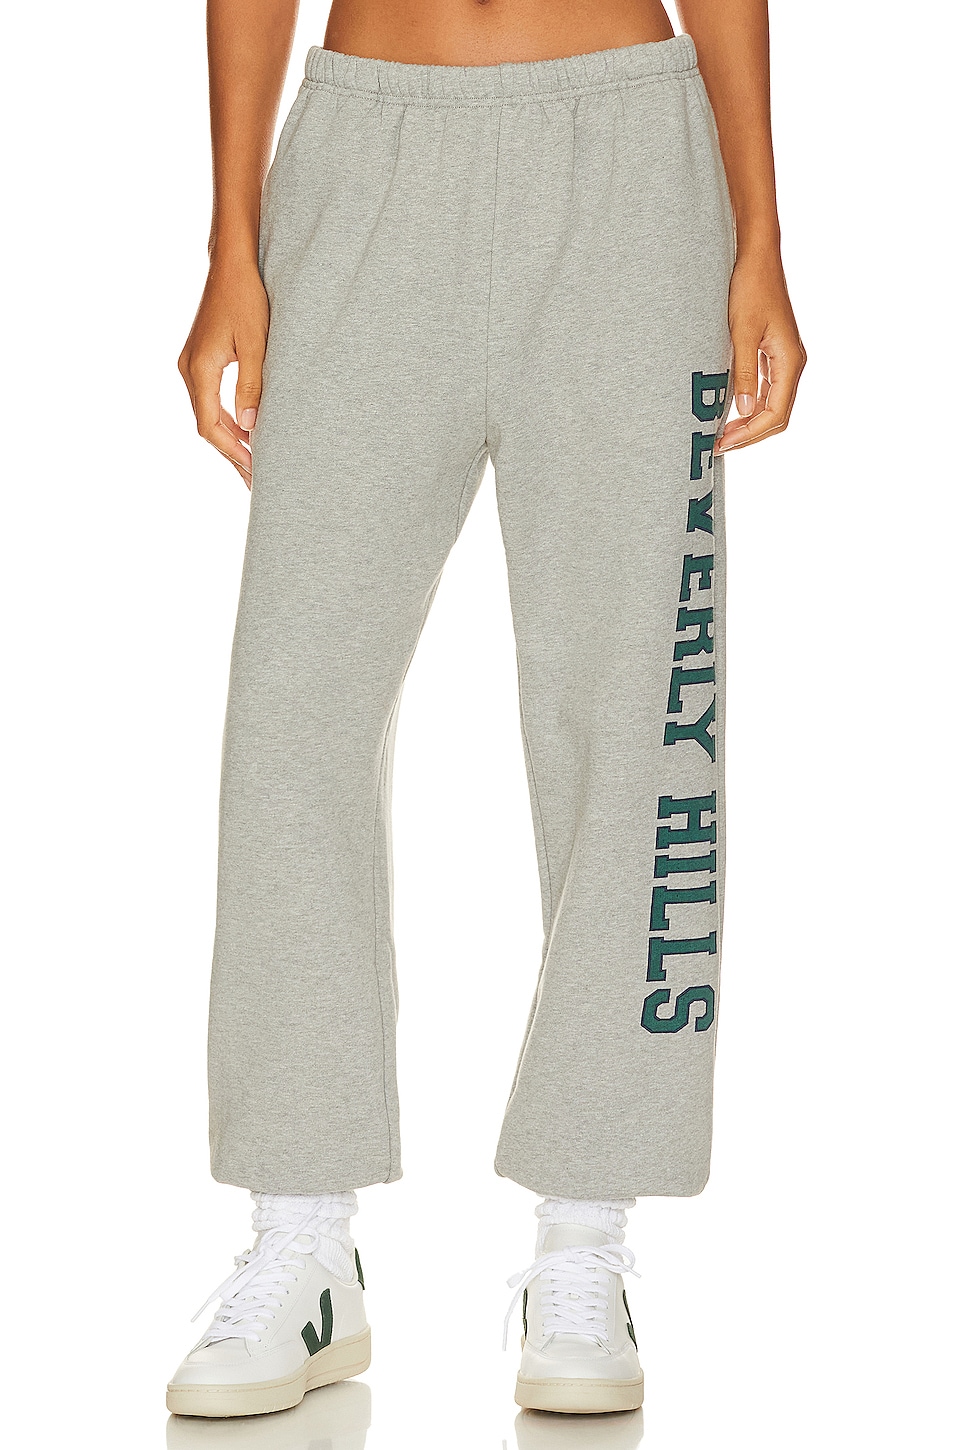 BEVERLY HILLS x REVOLVE Beverly Hills Sweatpant in Heather Grey